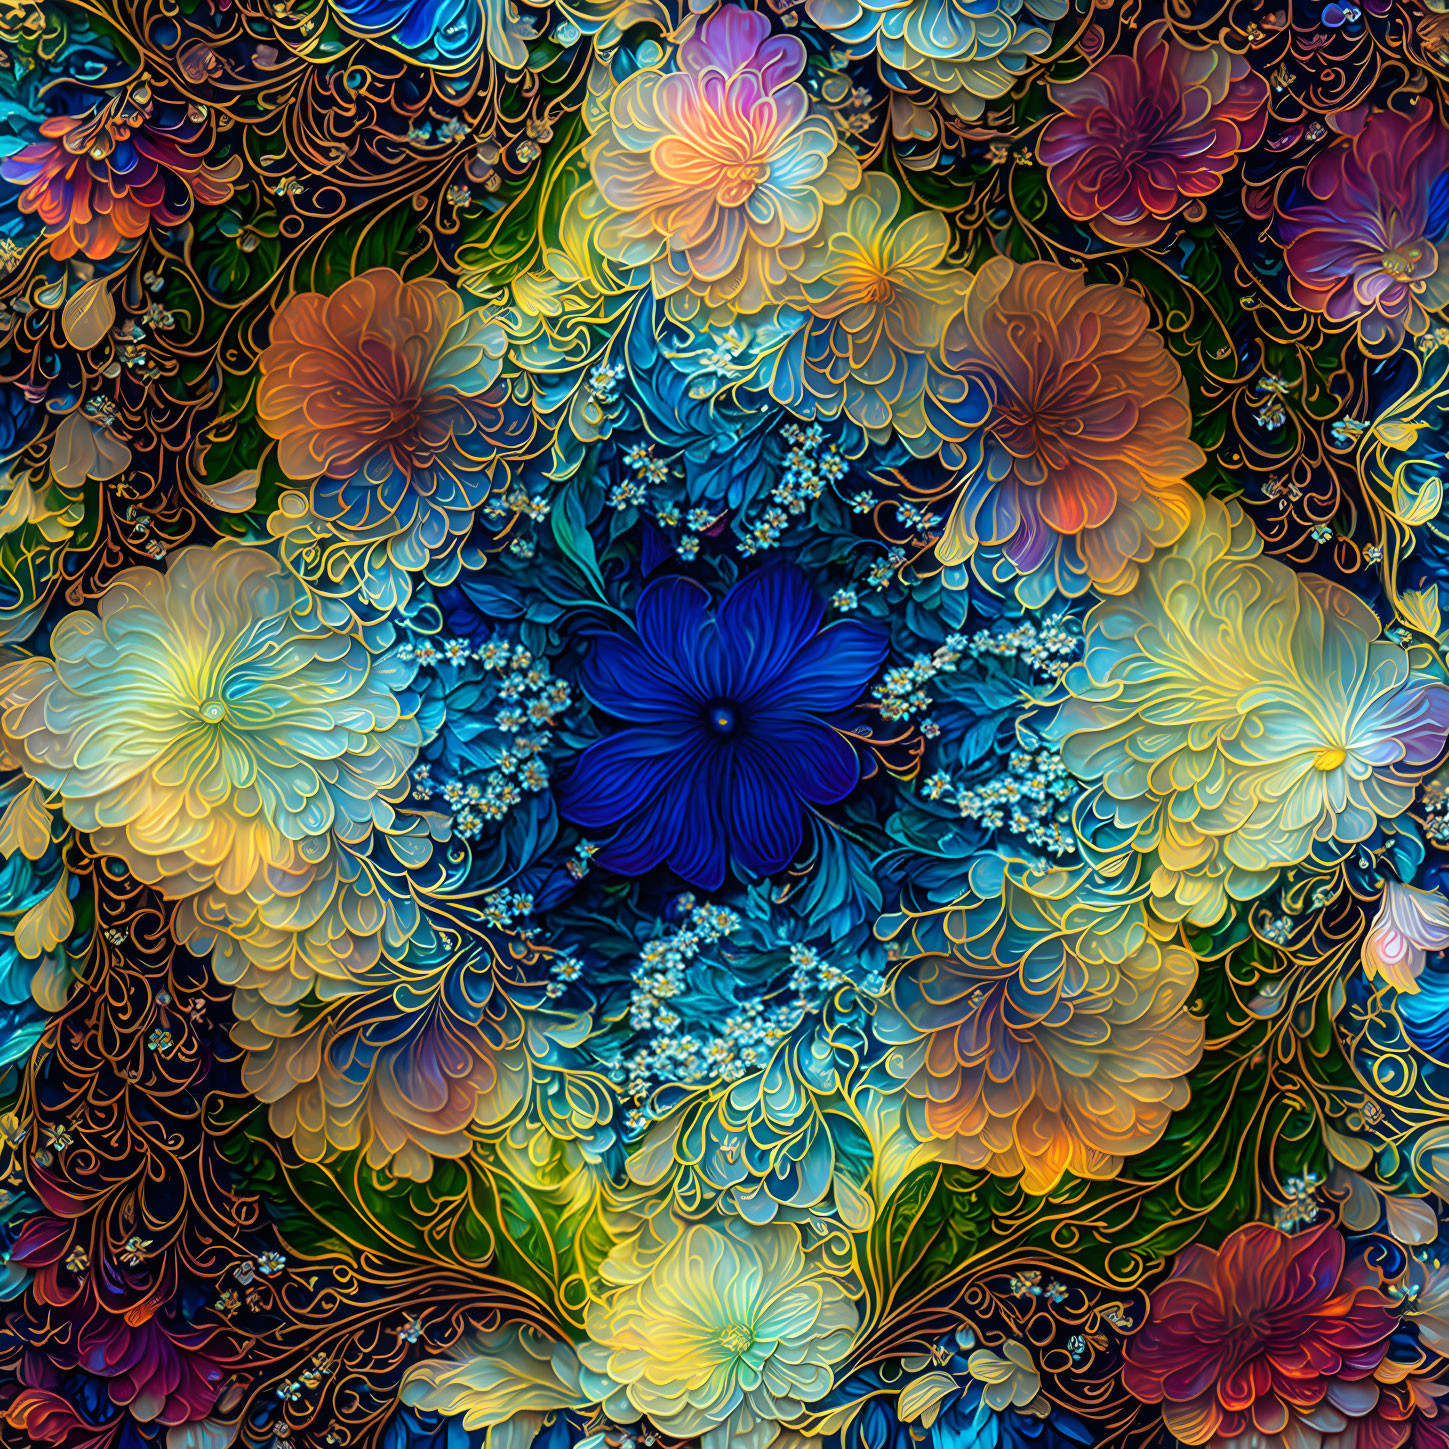 Colorful Digital Artwork: Intricate Floral Pattern in Deep Blues, Golds, and Purple